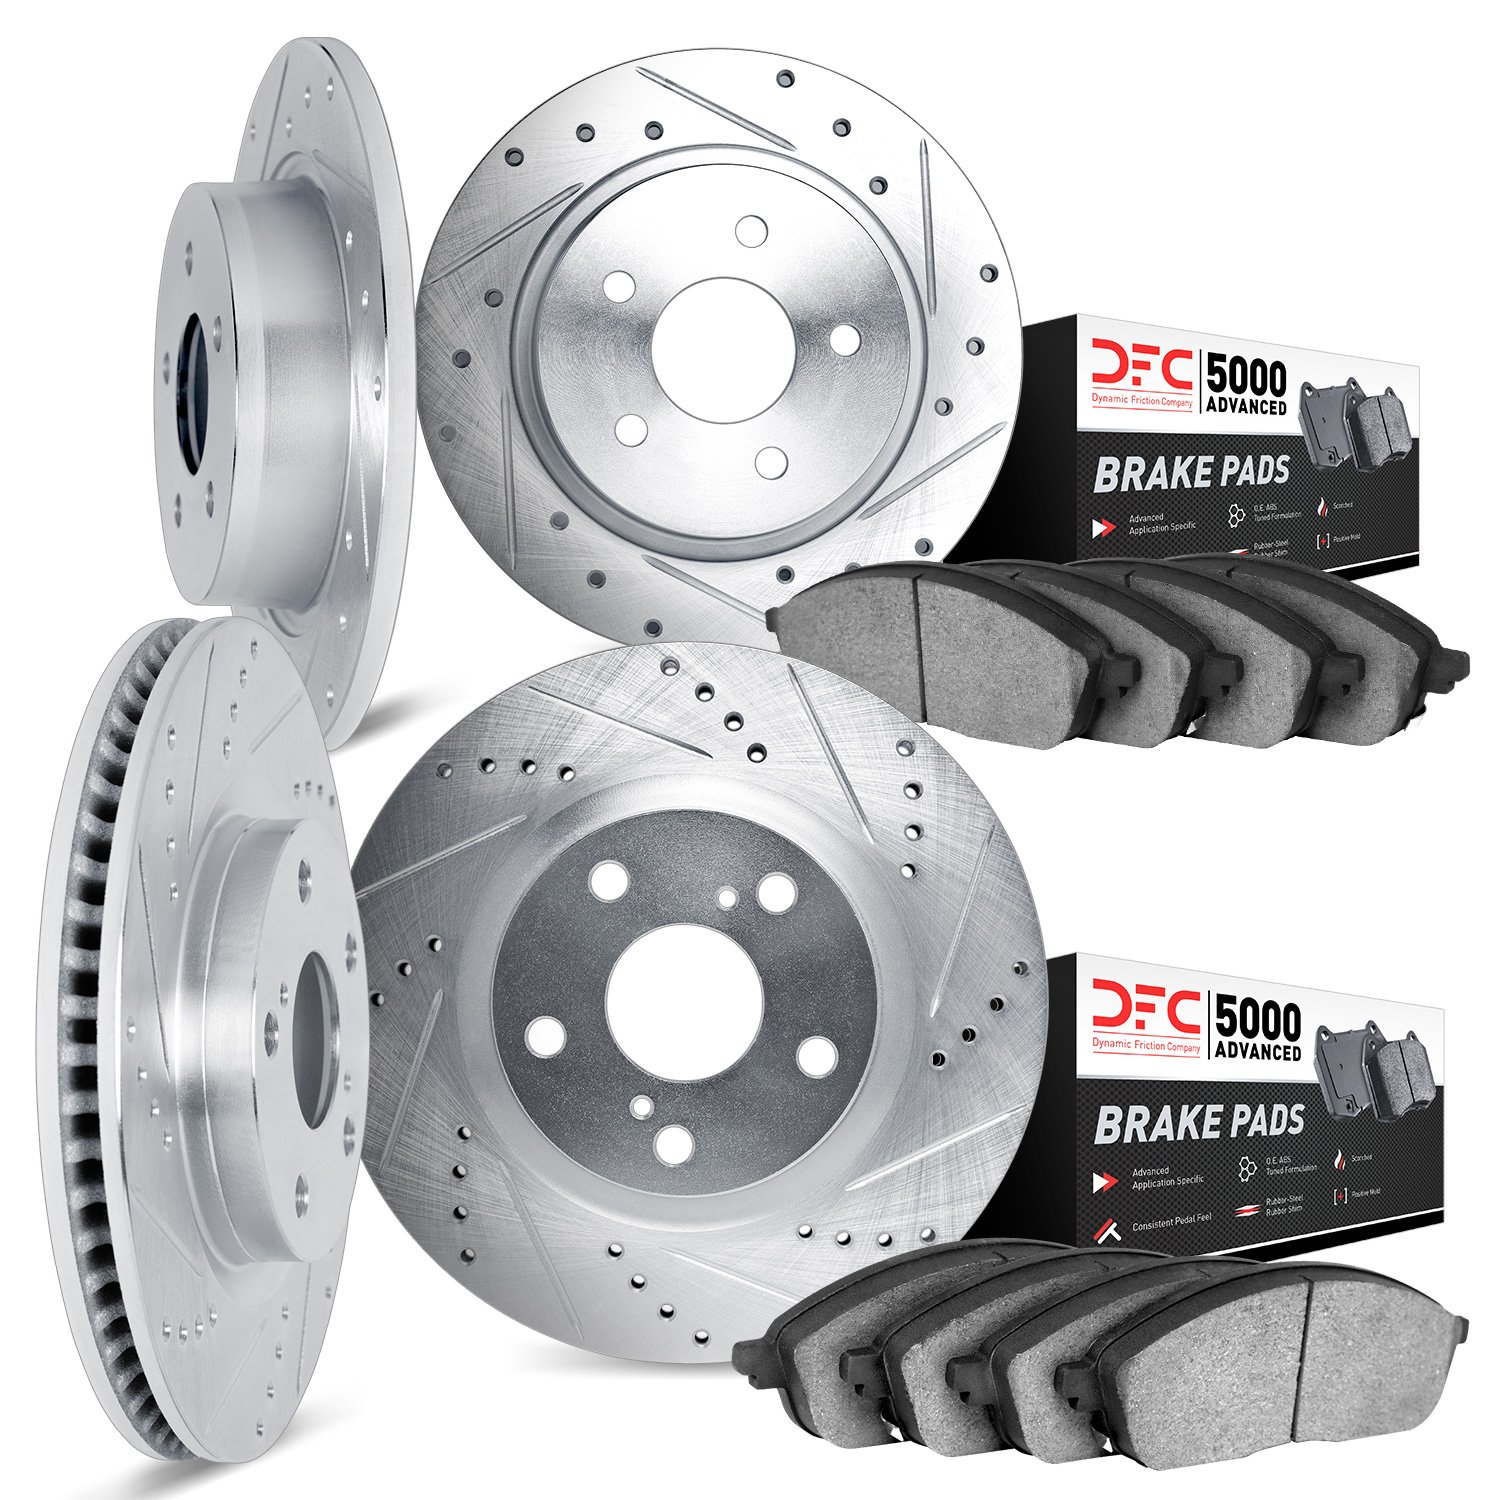 7504-68003 Drilled/Slotted Brake Rotors w/5000 Advanced Brake Pads Kit [Silver], 1990-1993 Infiniti/Nissan, Position: Front and